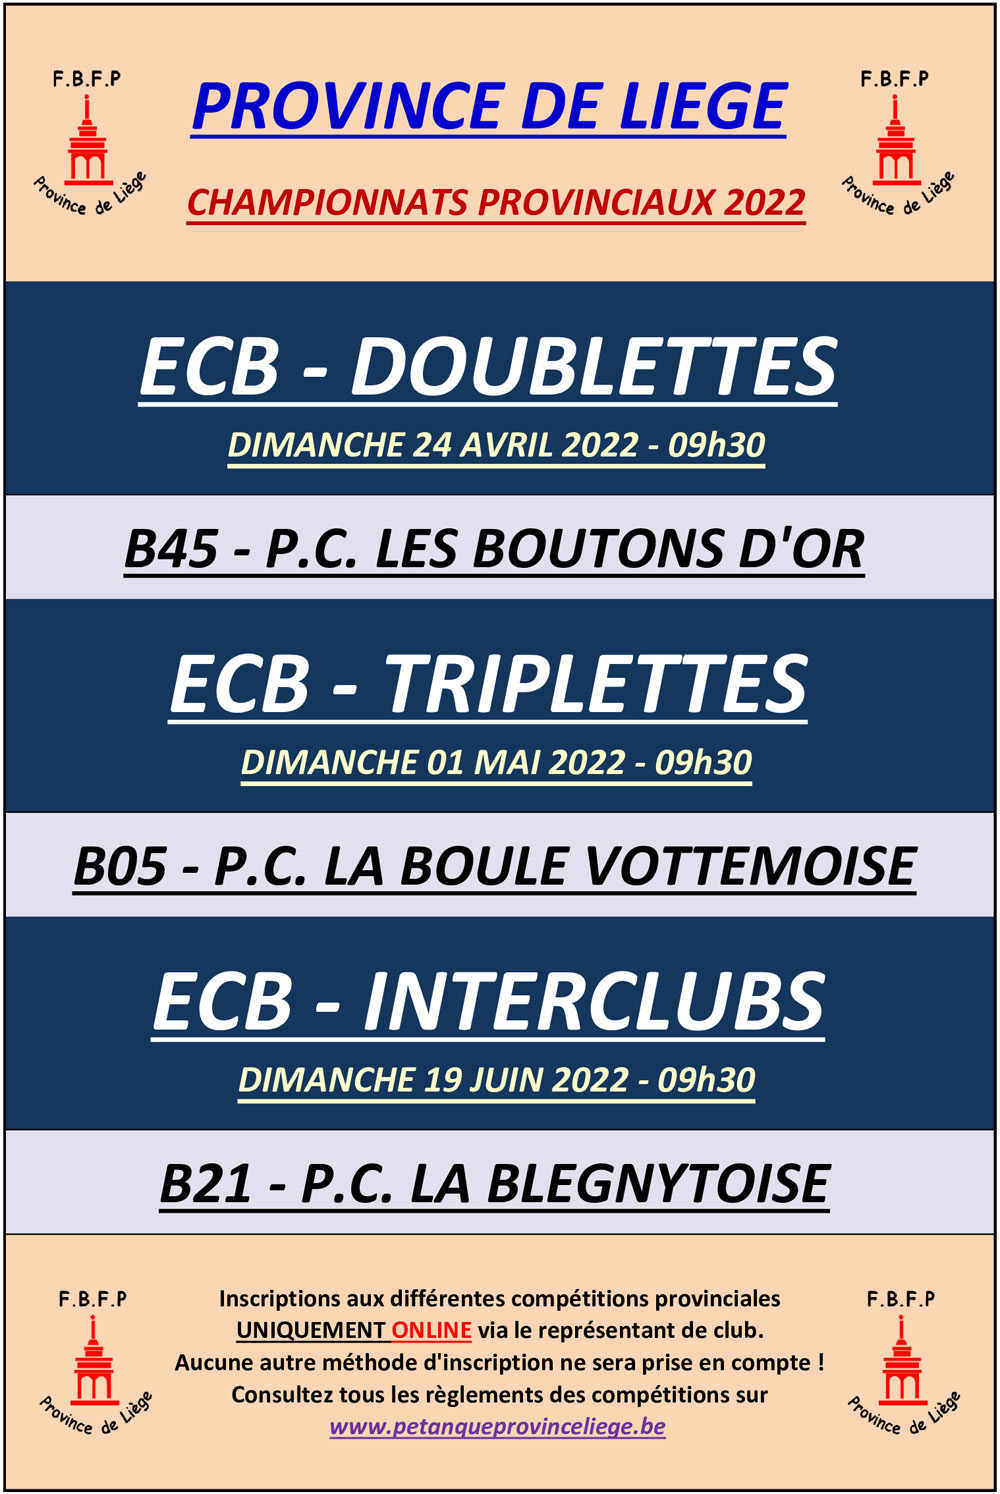 Afficge recapitulative CP 2022